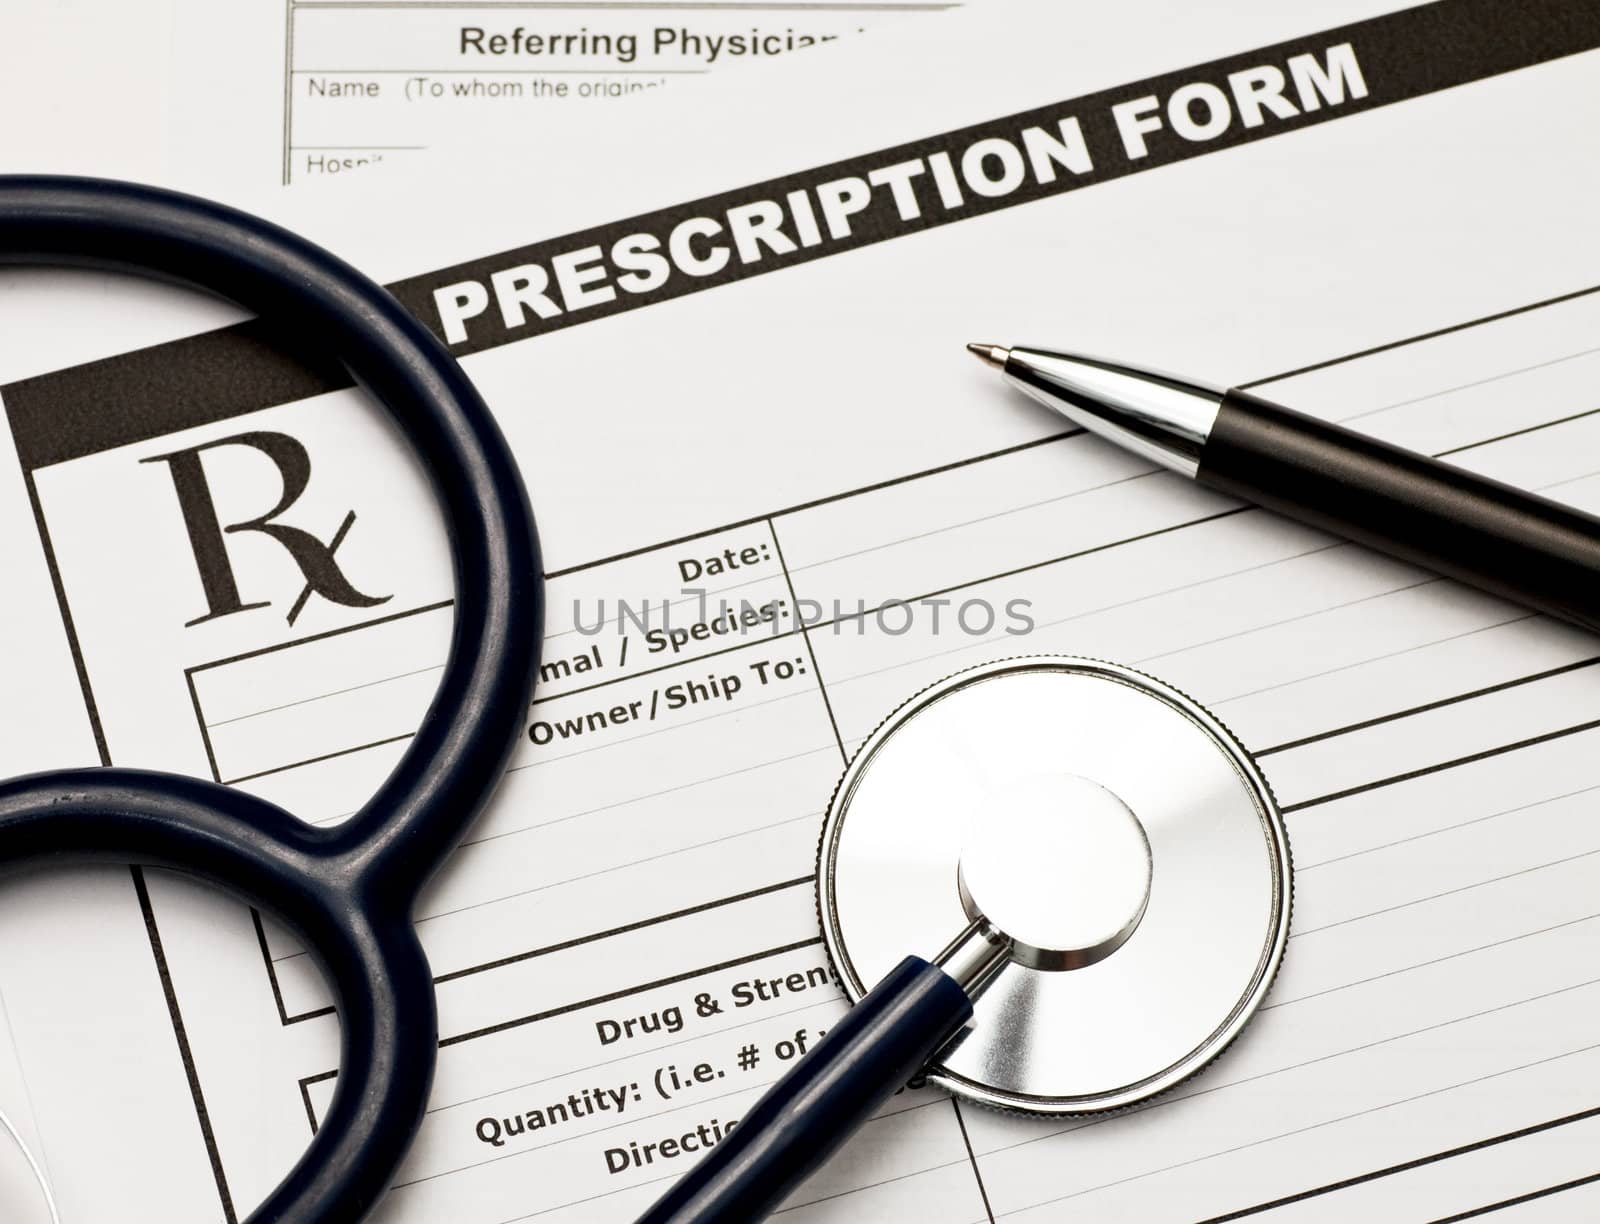 Blank veterinarian prescription form with stethoscope and pen